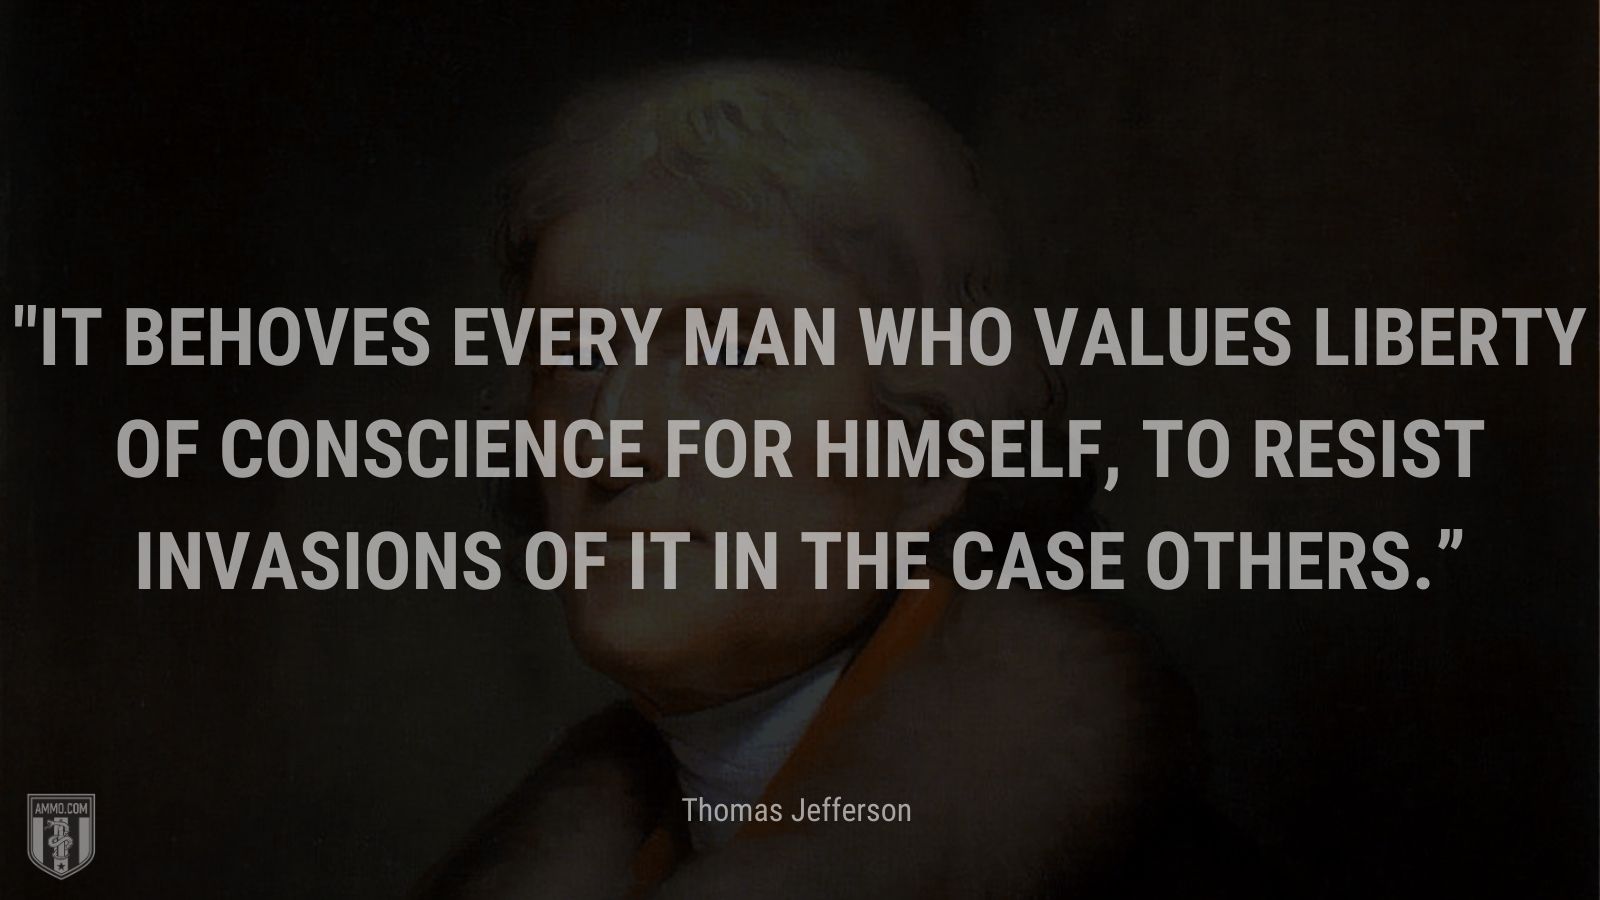 “It behoves every man who values liberty of conscience for himself, to resist invasions of it in the case others.” - Thomas Jefferson